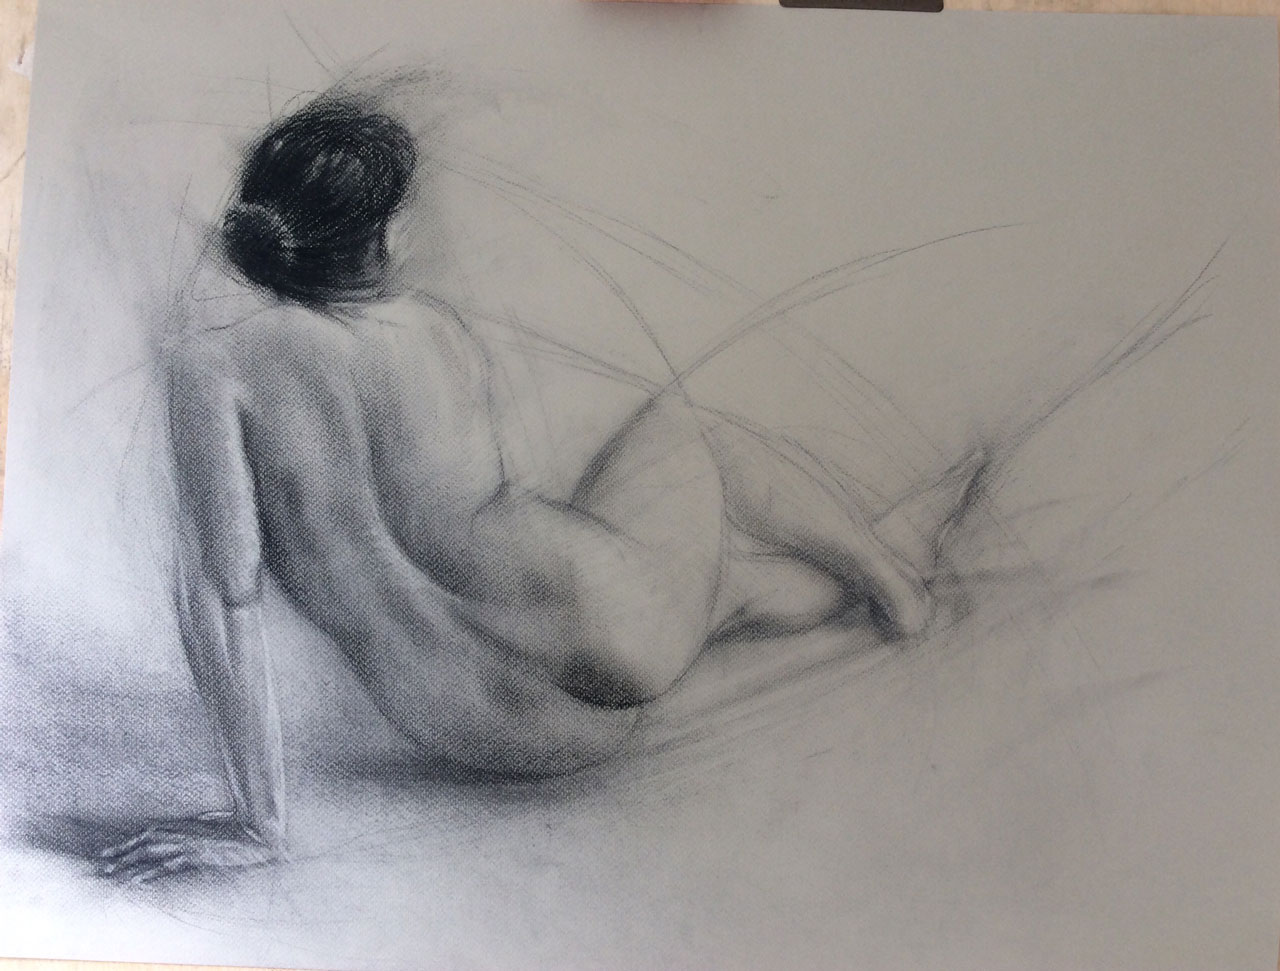 Michelle Castles Seated Nude Sketch